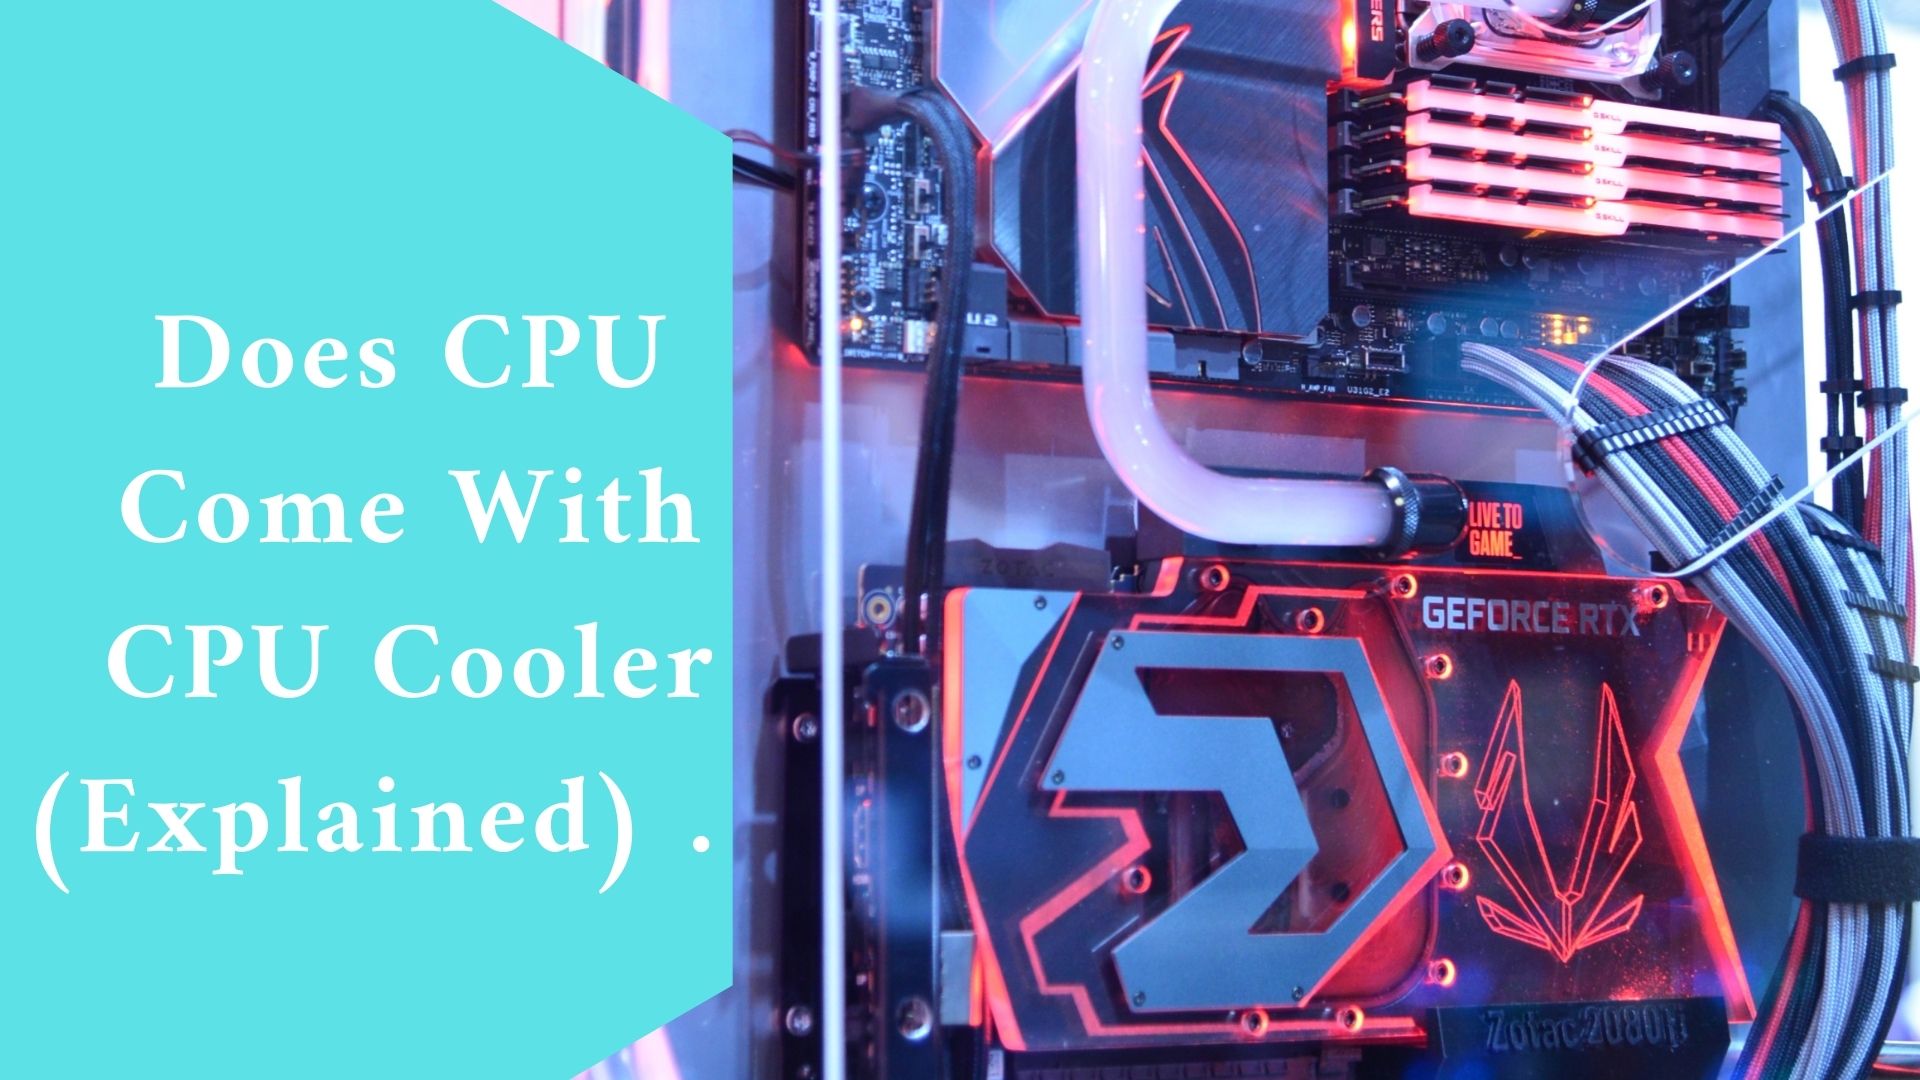 Does CPU Come With CPU Cooler (Explained)